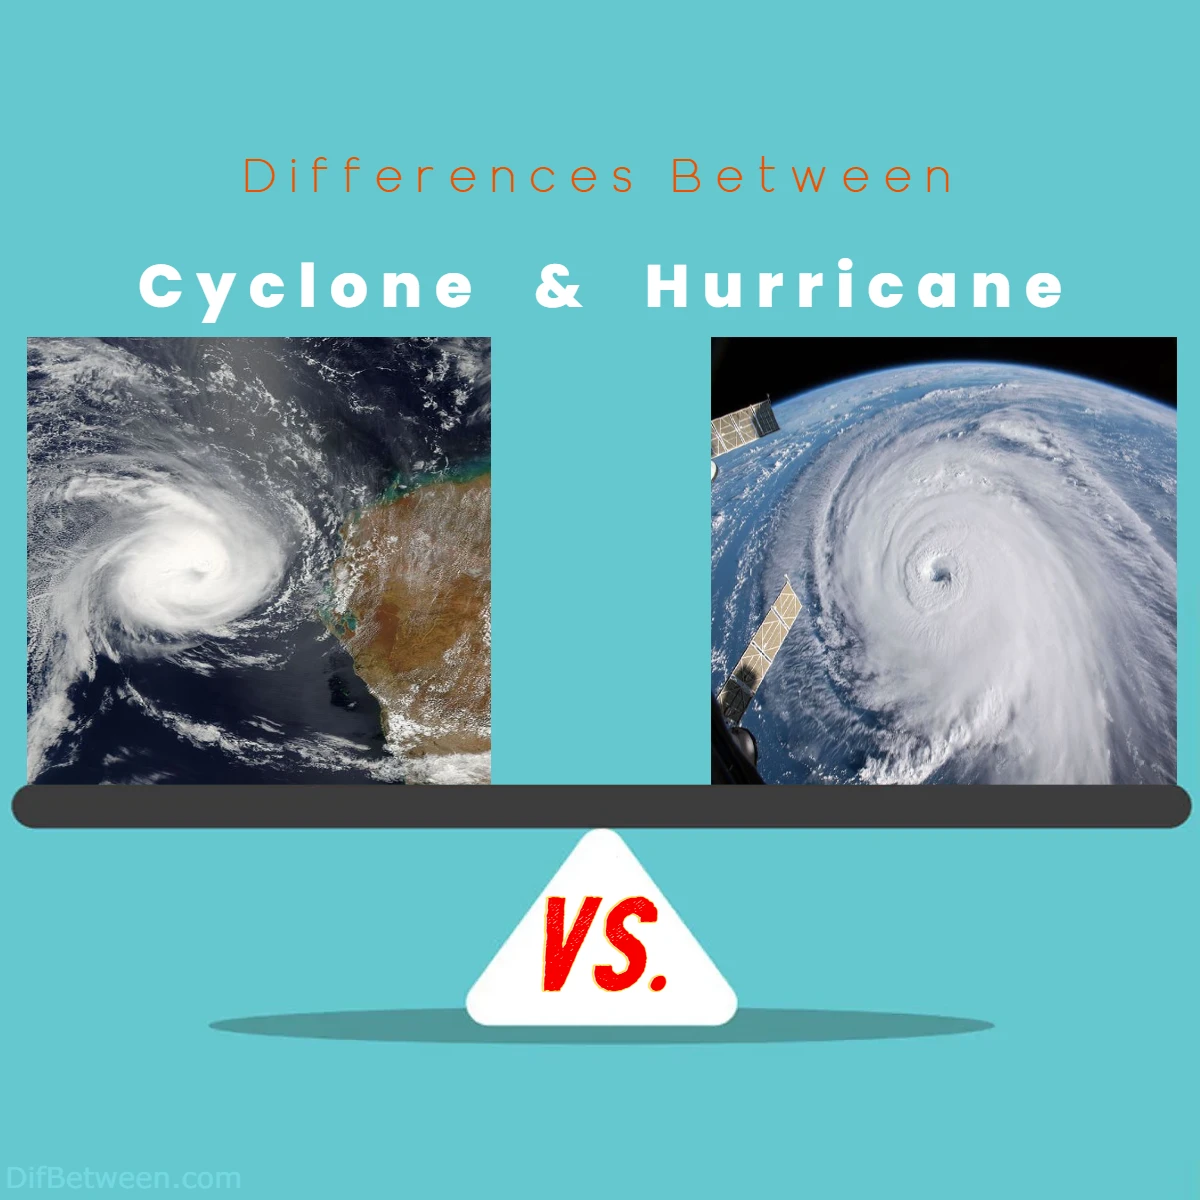 Differences Between Cyclone vs Hurricane